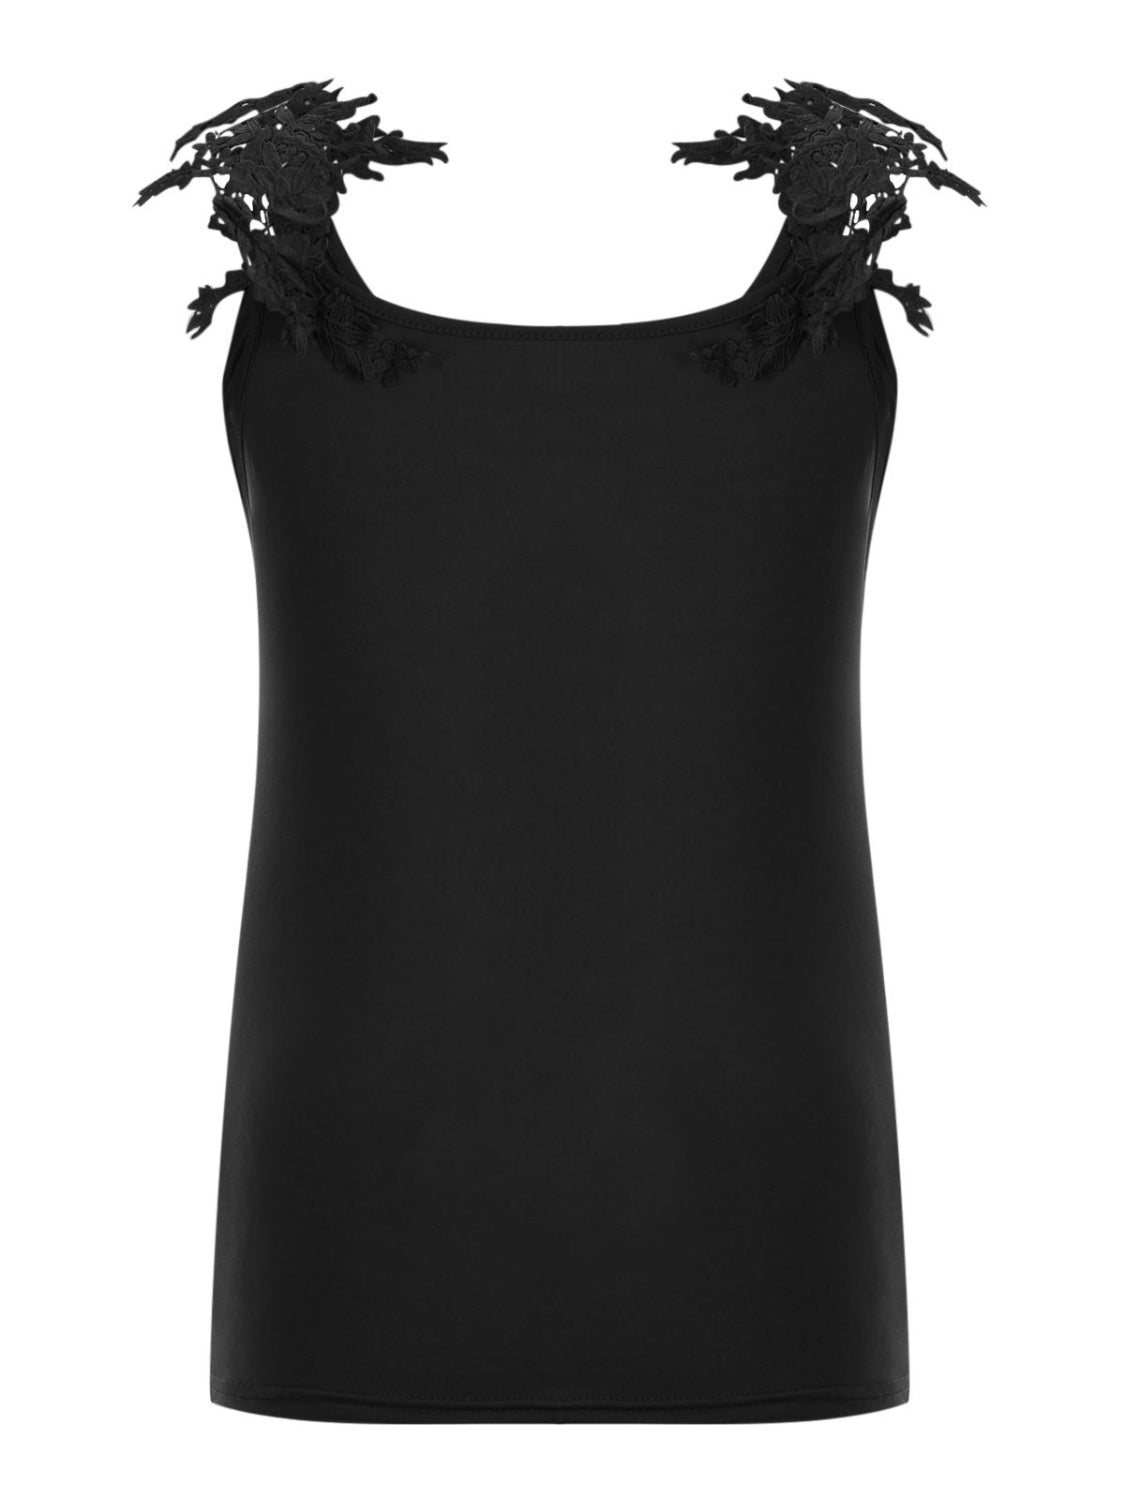 PREORDER- Full Size Lace Detail Scoop Neck Tank